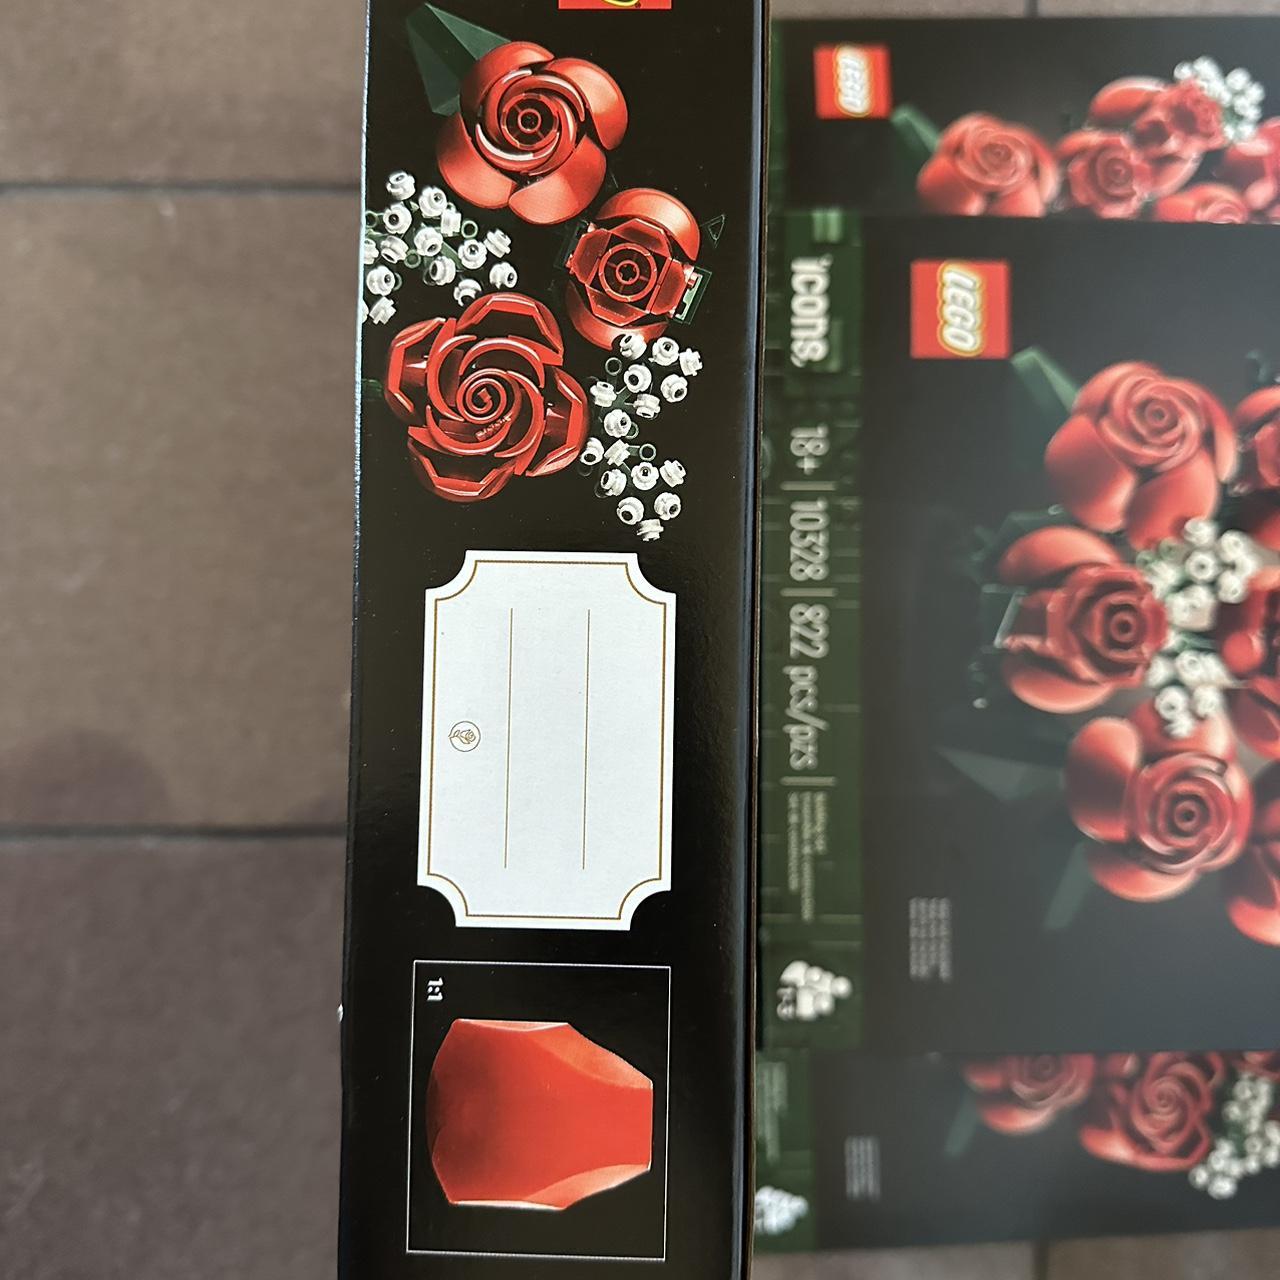 Lego bouquet rose #10328 Brand new in box ready to - Depop